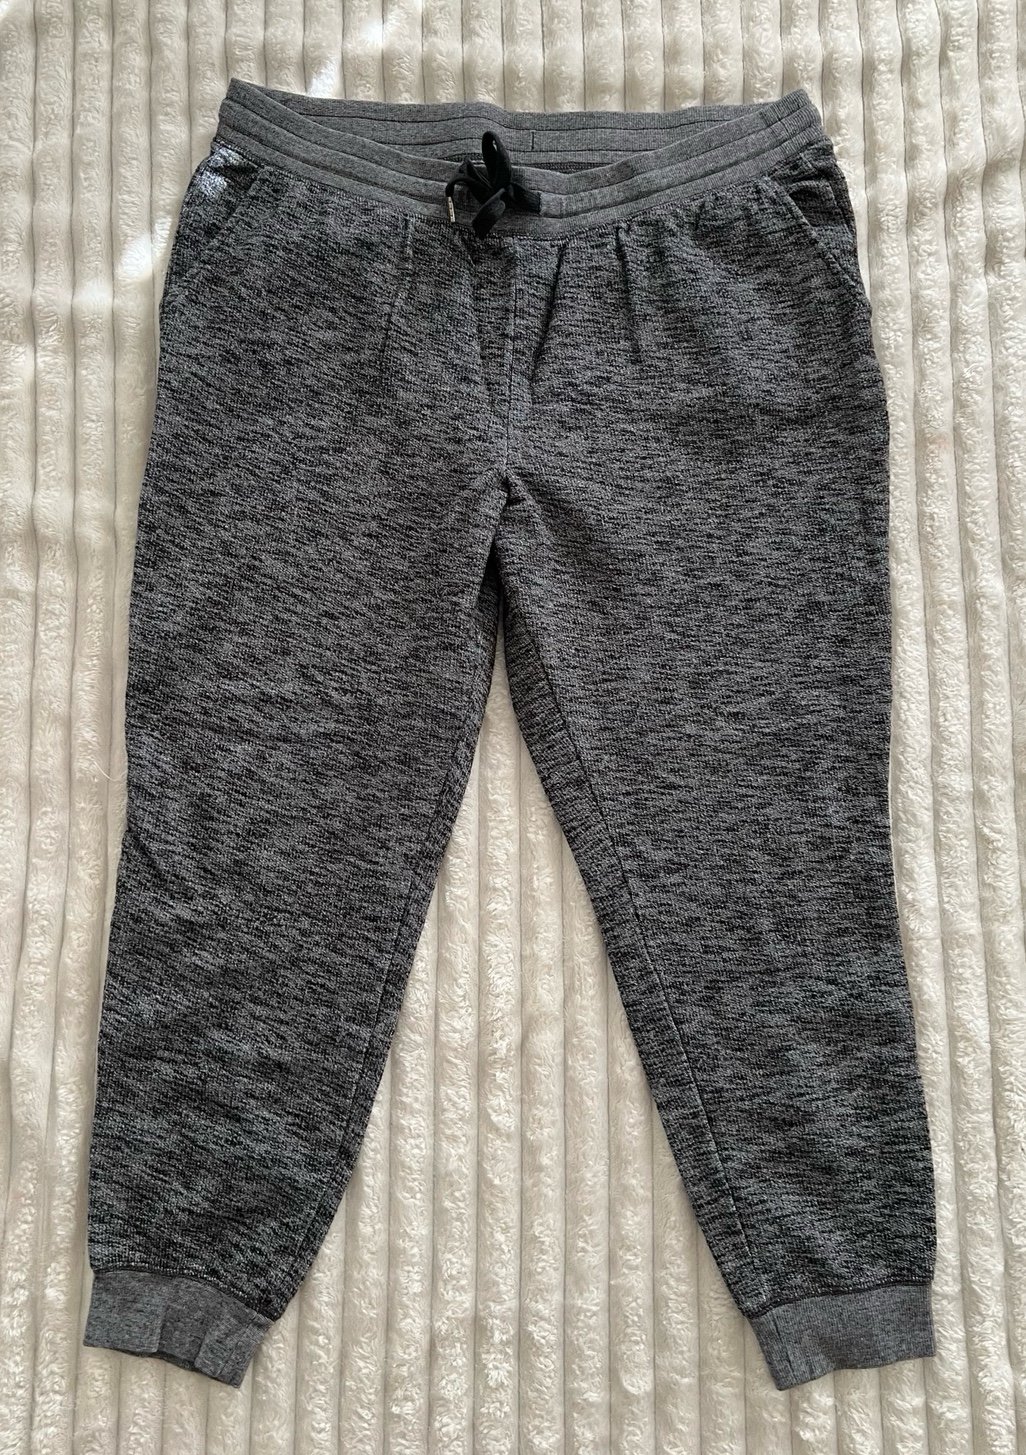 Buy Women’s Old Navy, joggers size extra large LIVXw5n2H Store Online